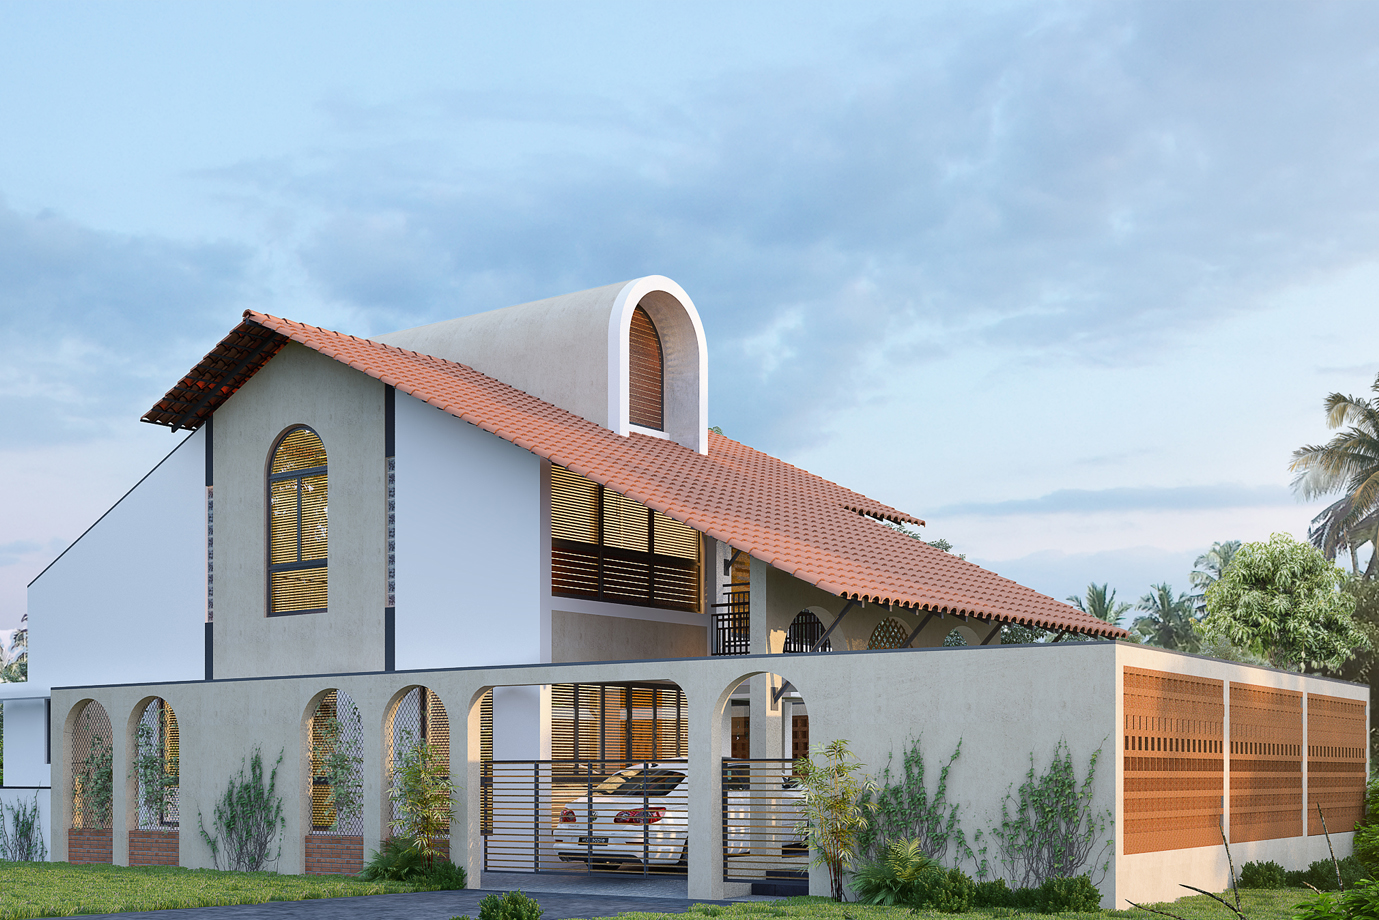 Top 40 Architecture Firms in Kerala - SOHO Architects, Calicut